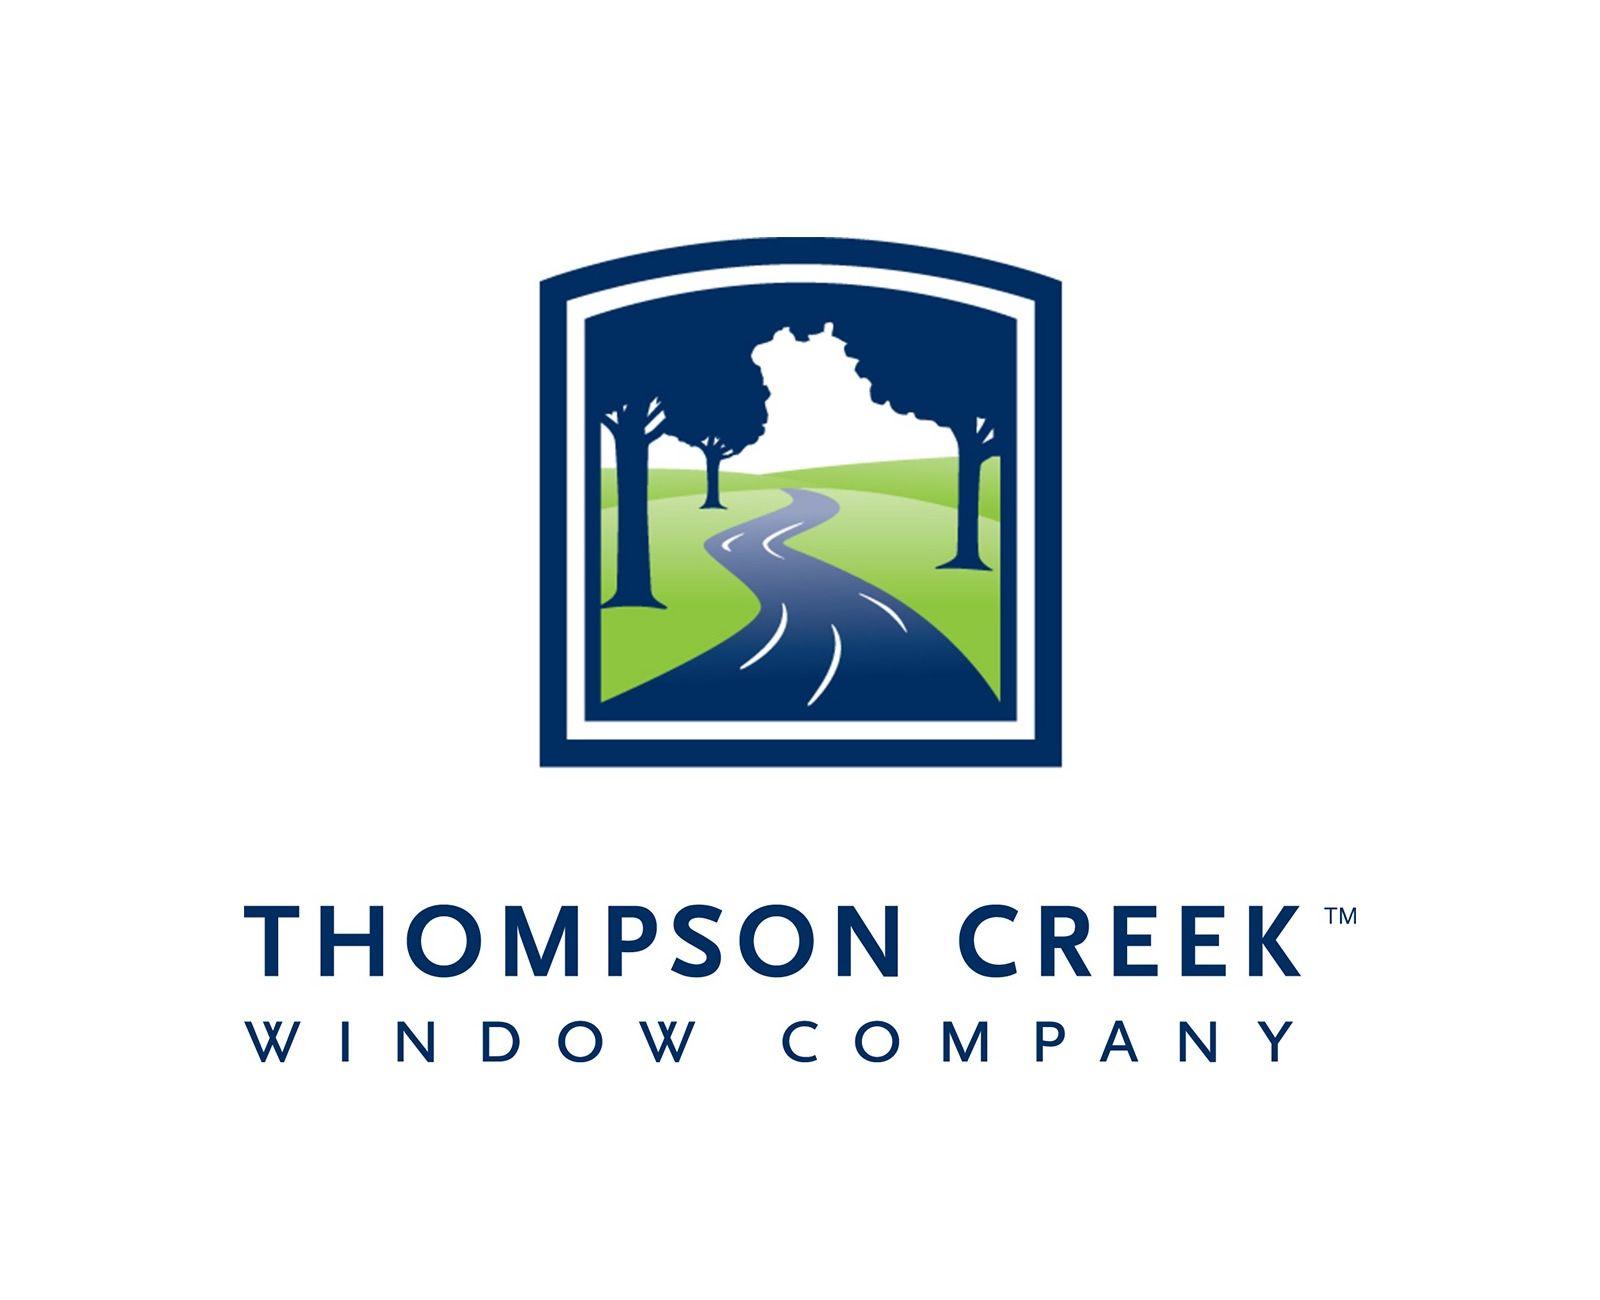 Creek Logo - Your Replacement Windows and Doors Company - Thompson Creek